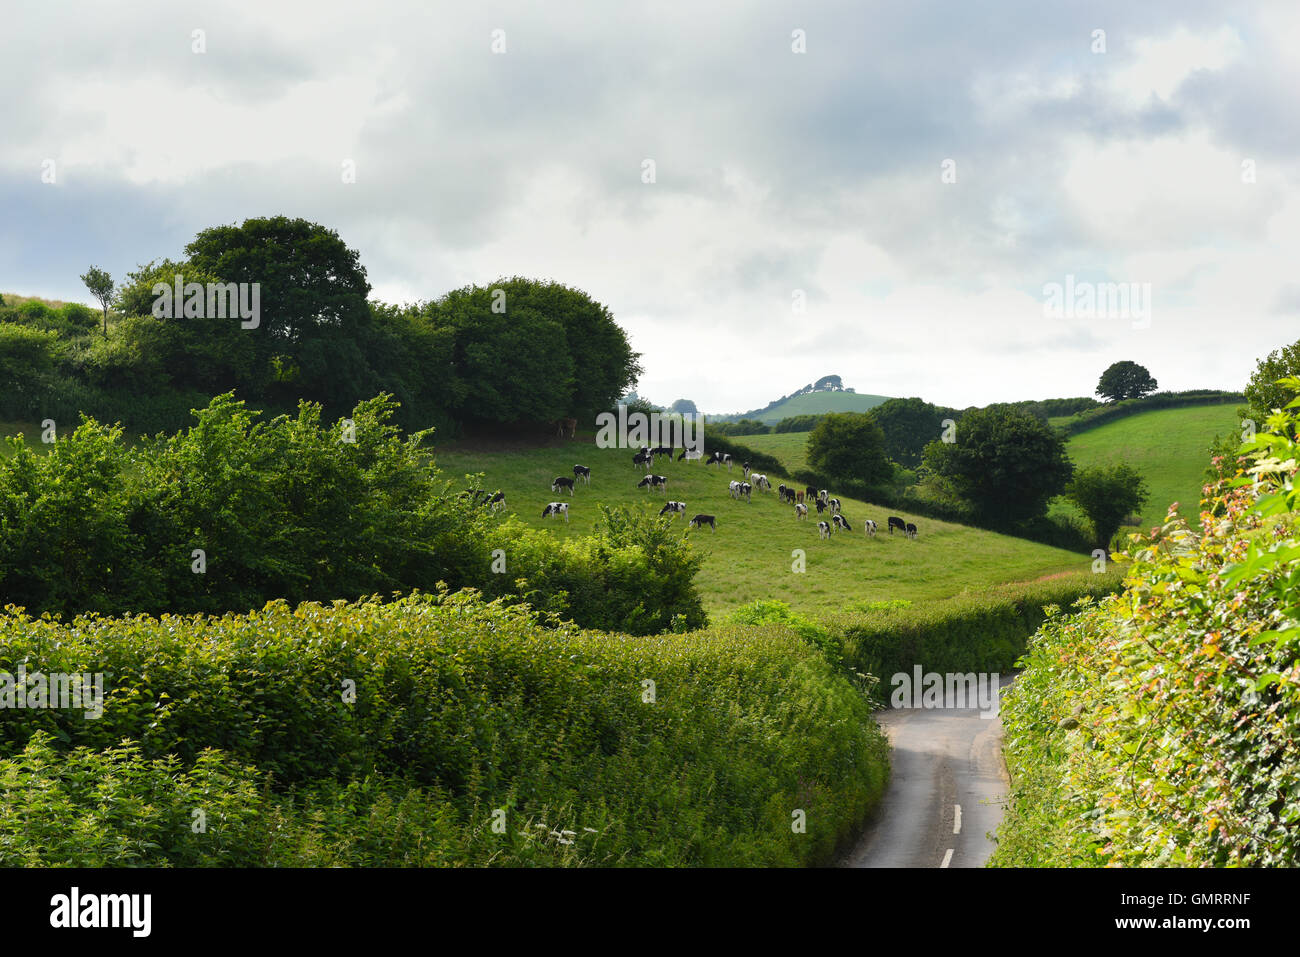 Dorset countryside with a winding lane and cows grazing in the field.  Dorset, UK, United Kingdom Stock Photo